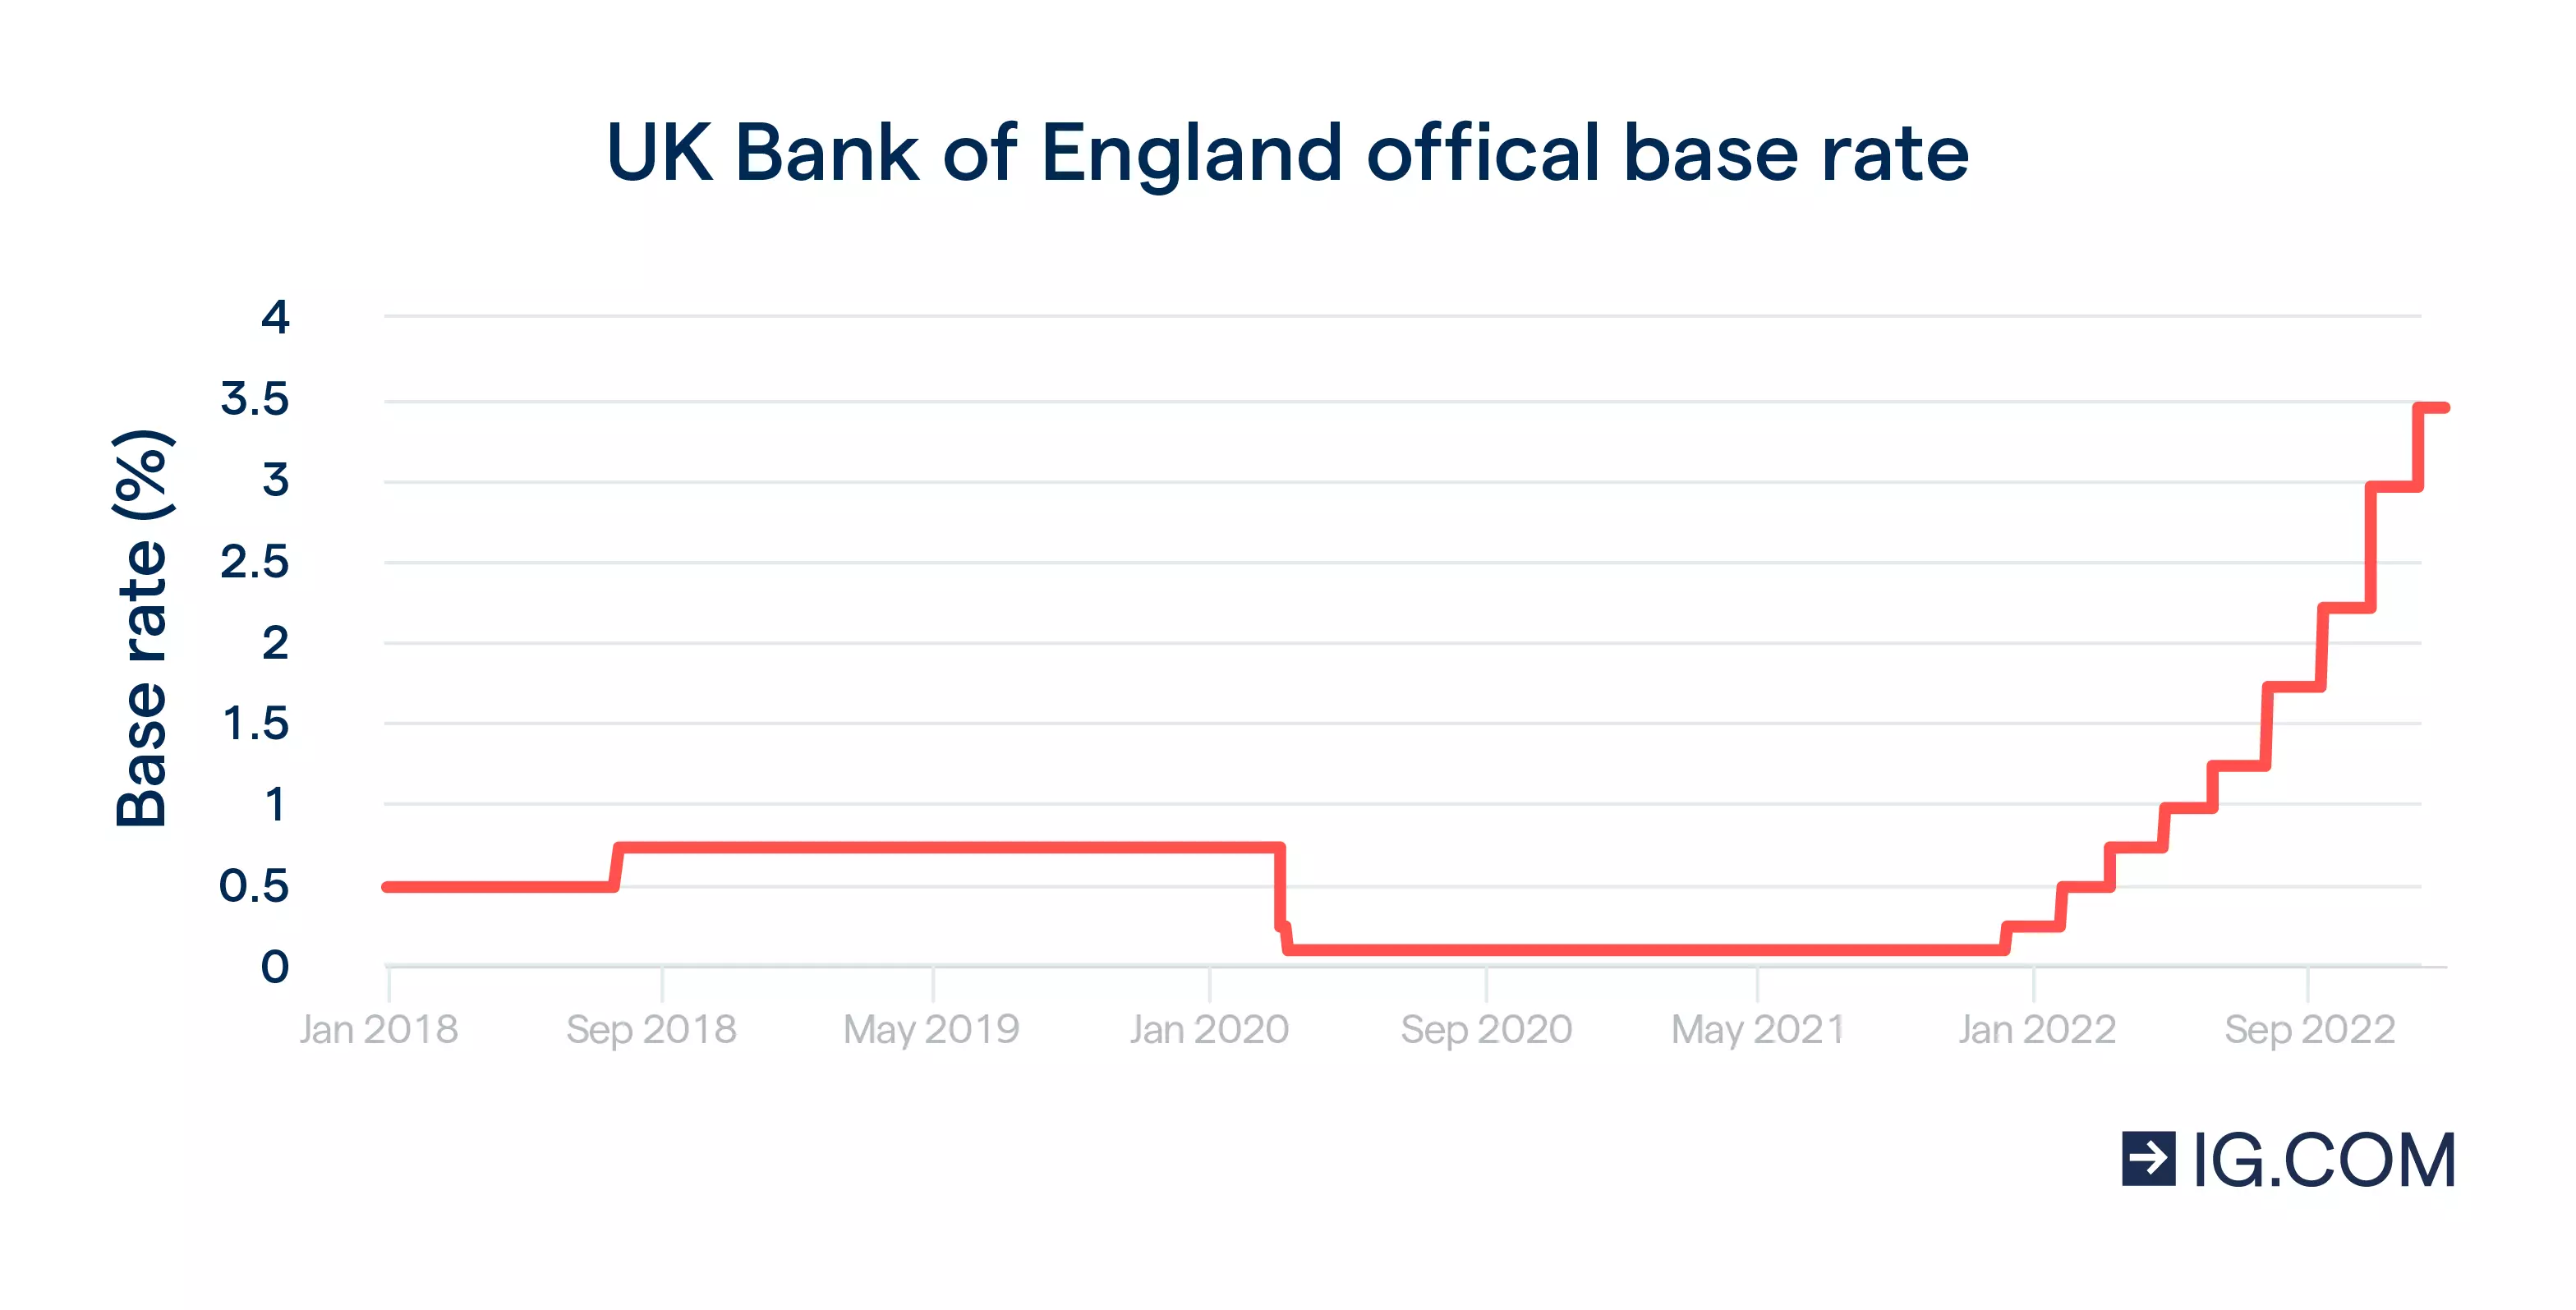 Chart showing the UK Bank of England Official Bank Rate over the past 5 years.